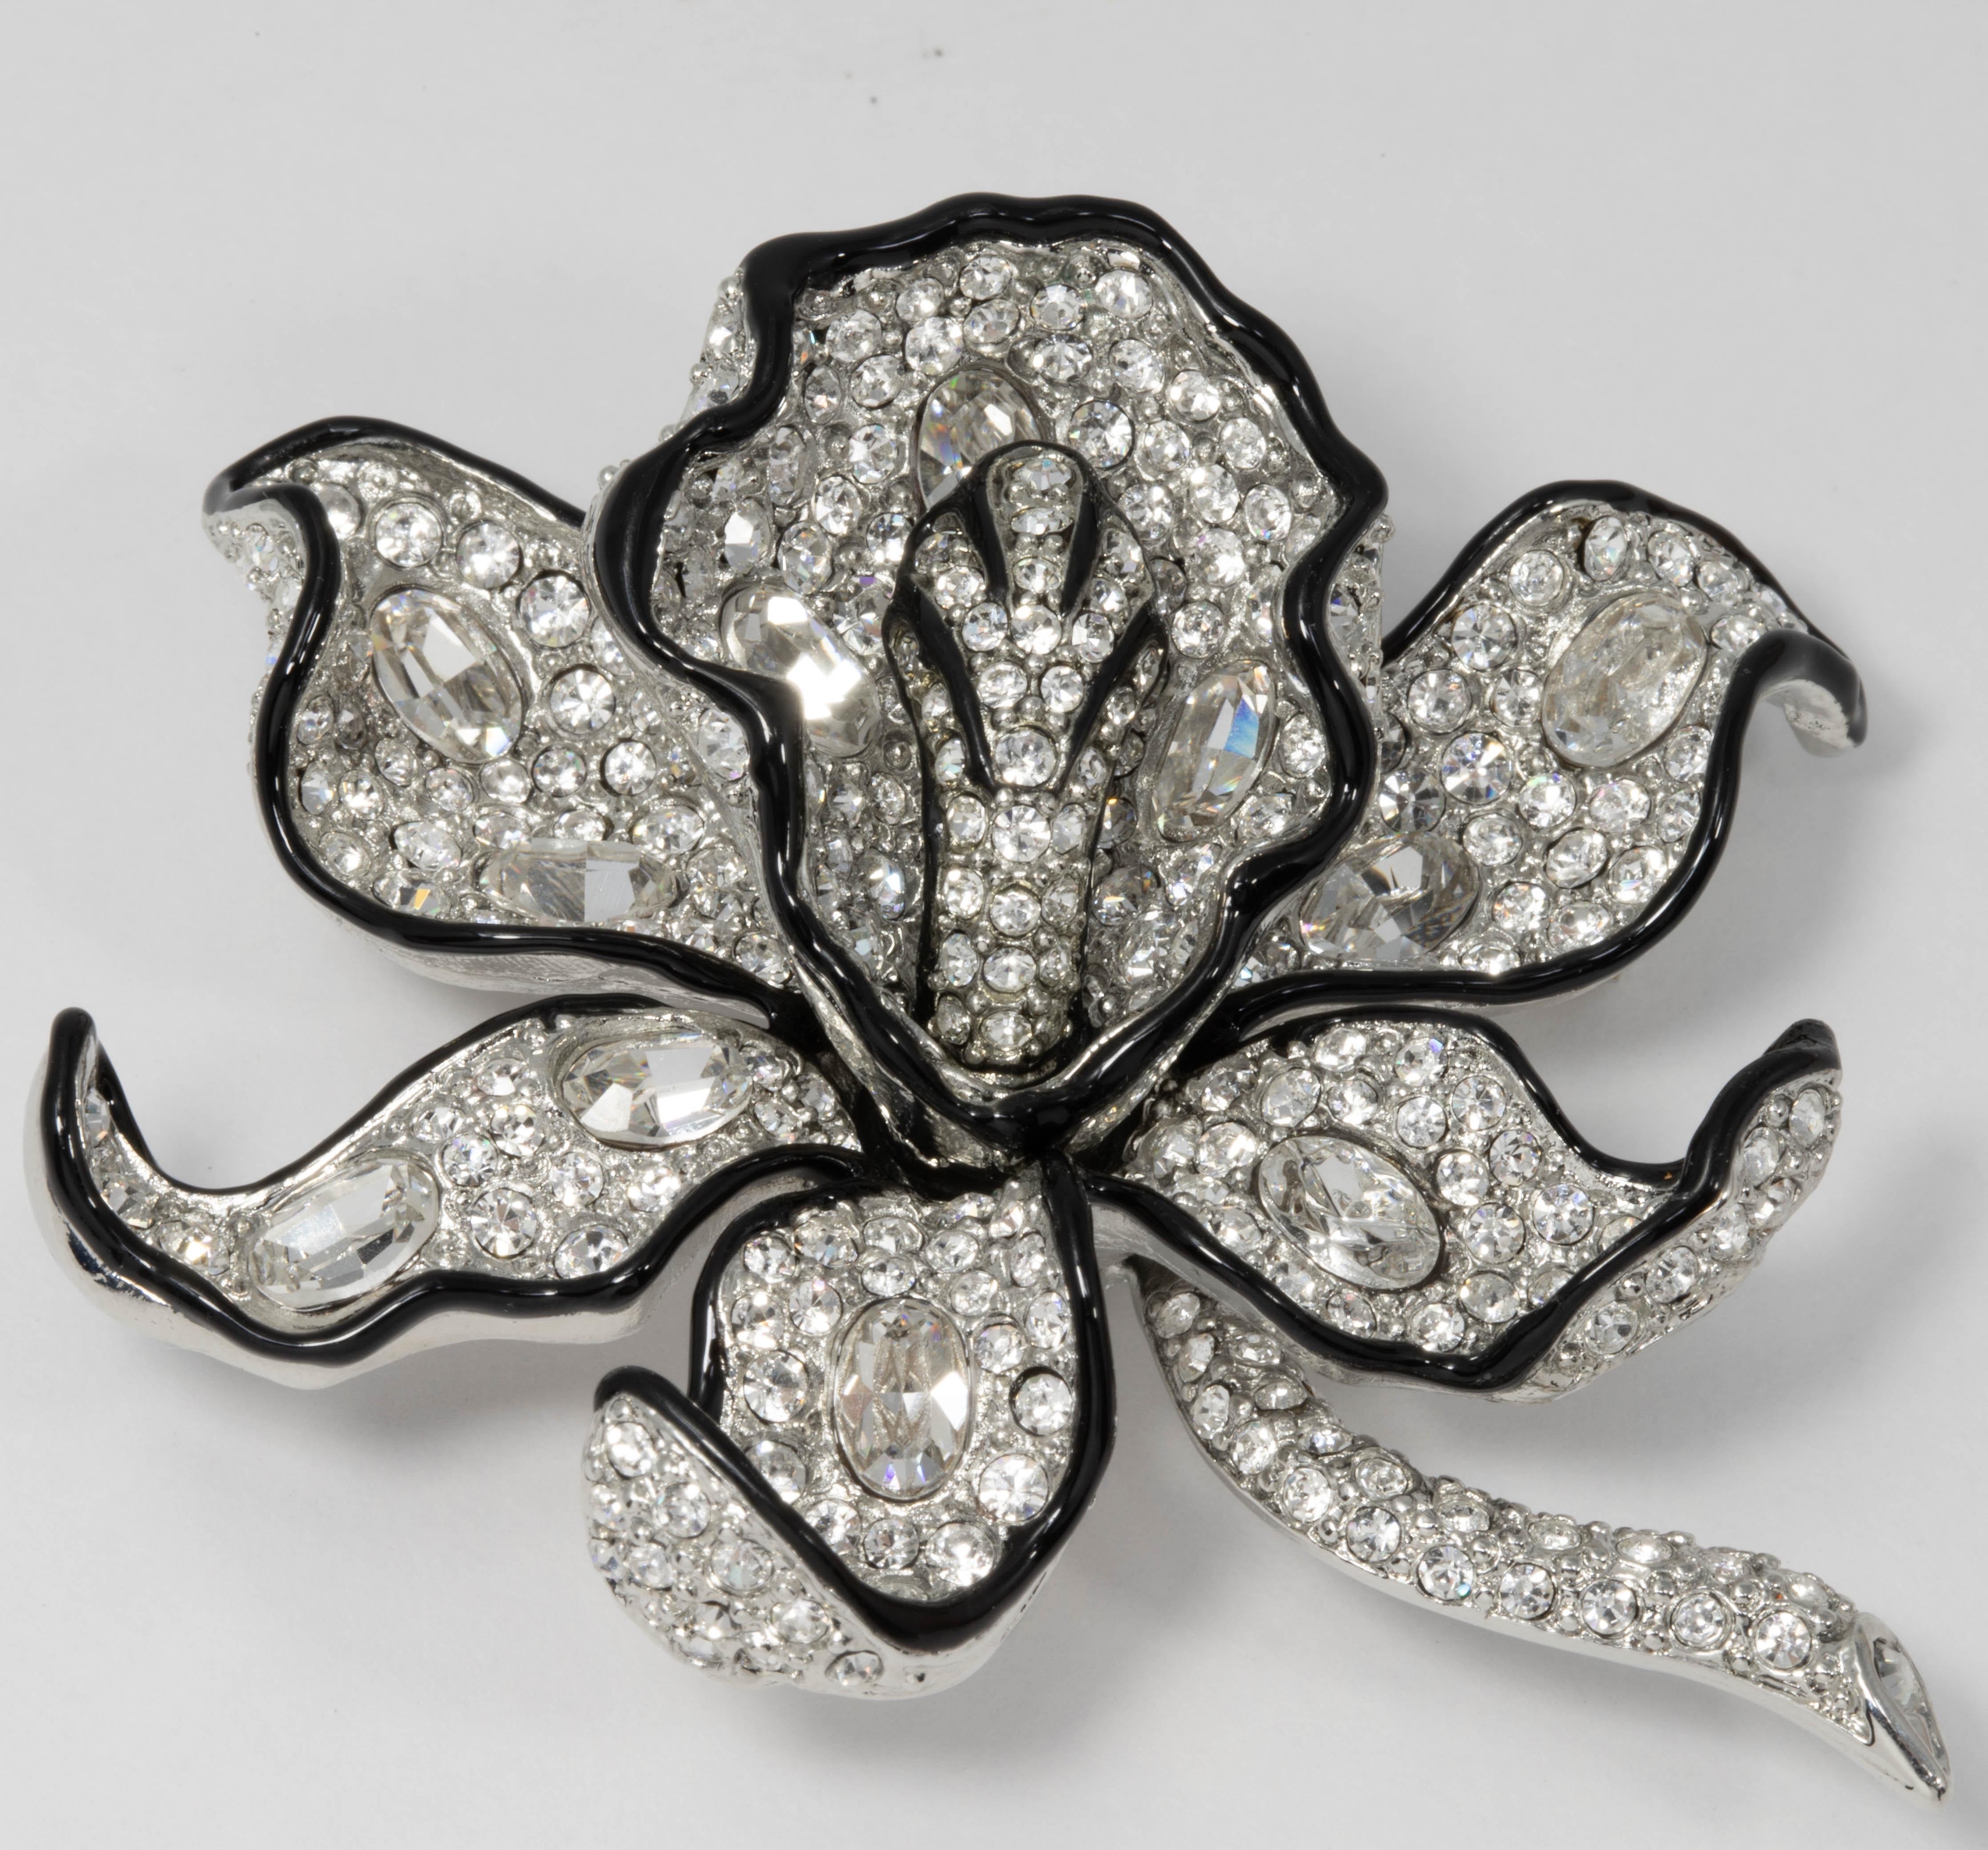 Flower chic! This pin brooch by Kenneth Jay Lane features pave clear crystals on a silvertone flower, accented with black enamel trim for a subtle contrast.

Tags, Marks, Hallmarks: Kenneth © Lane